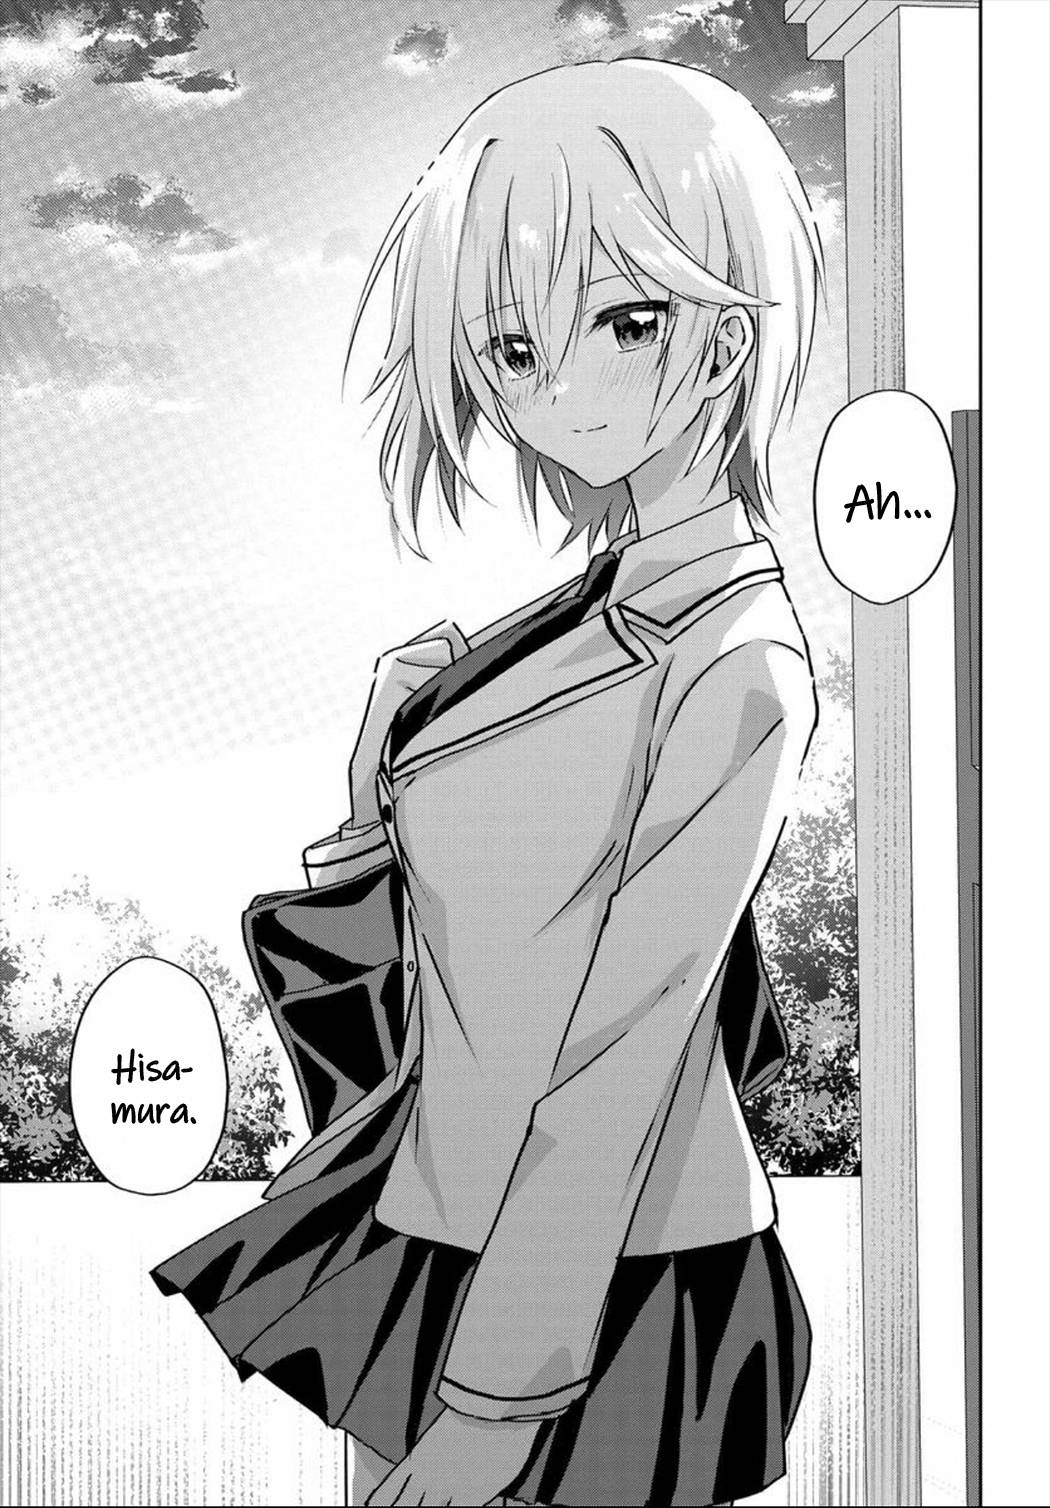 Since I’ve Entered the World of Romantic Comedy Manga, I’ll Do My Best to Make the Losing Heroine Happy. - chapter 3.5 - #3